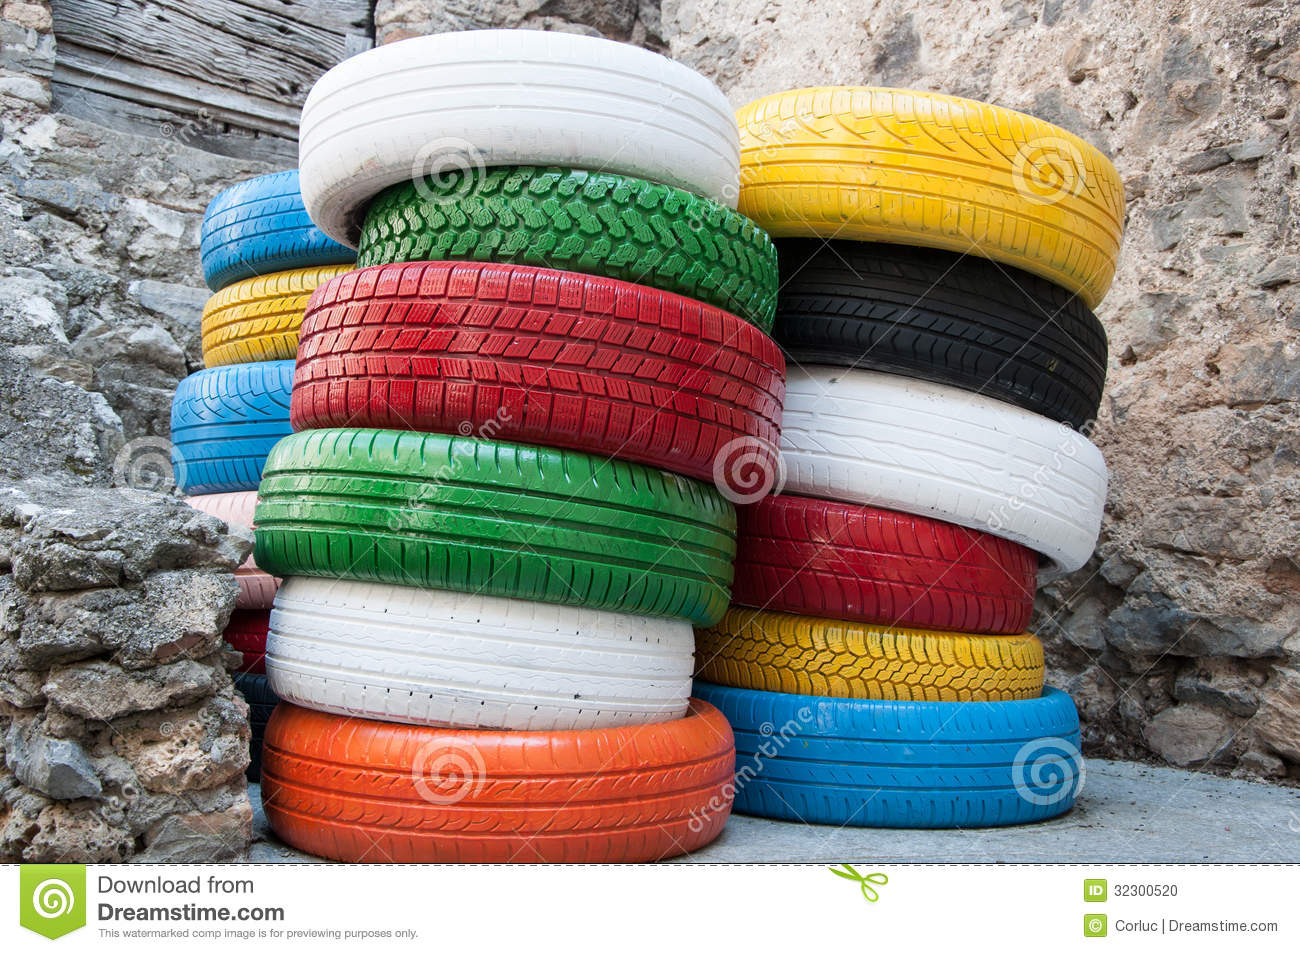 colored-tyres-some-old-standing-outside-workshop-32300520.jpg